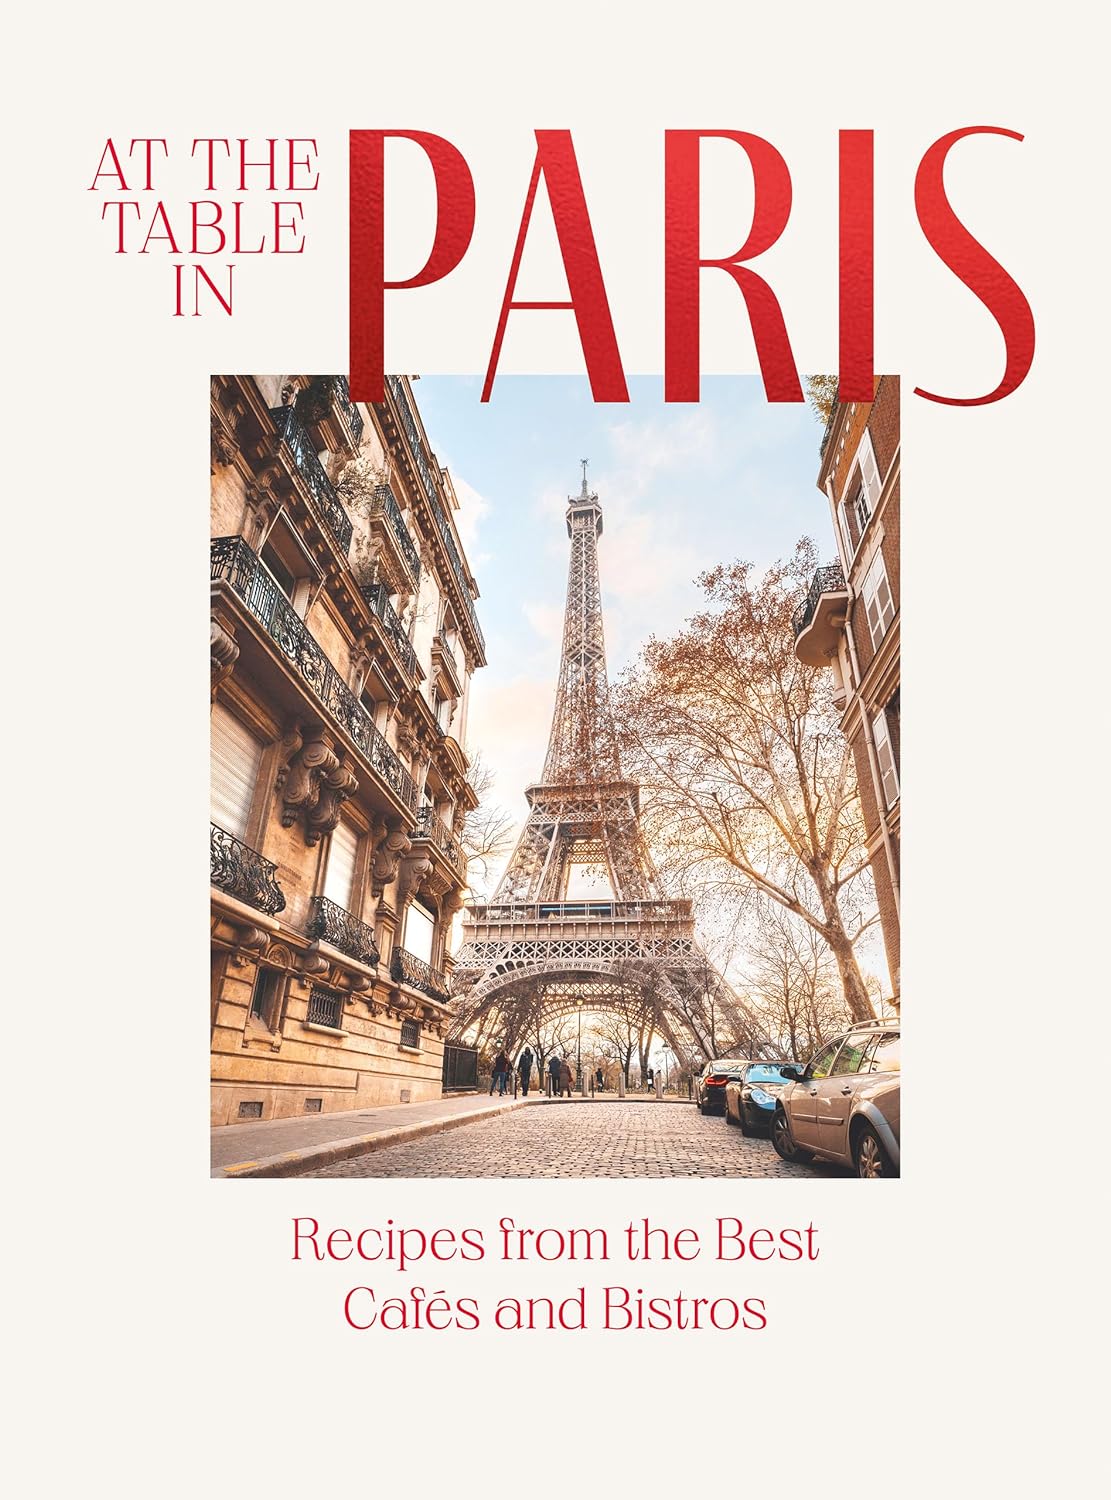 At the Table in Paris: Recipes from the Best Cafés and Bistros (Jan Thorbecke Verlag)